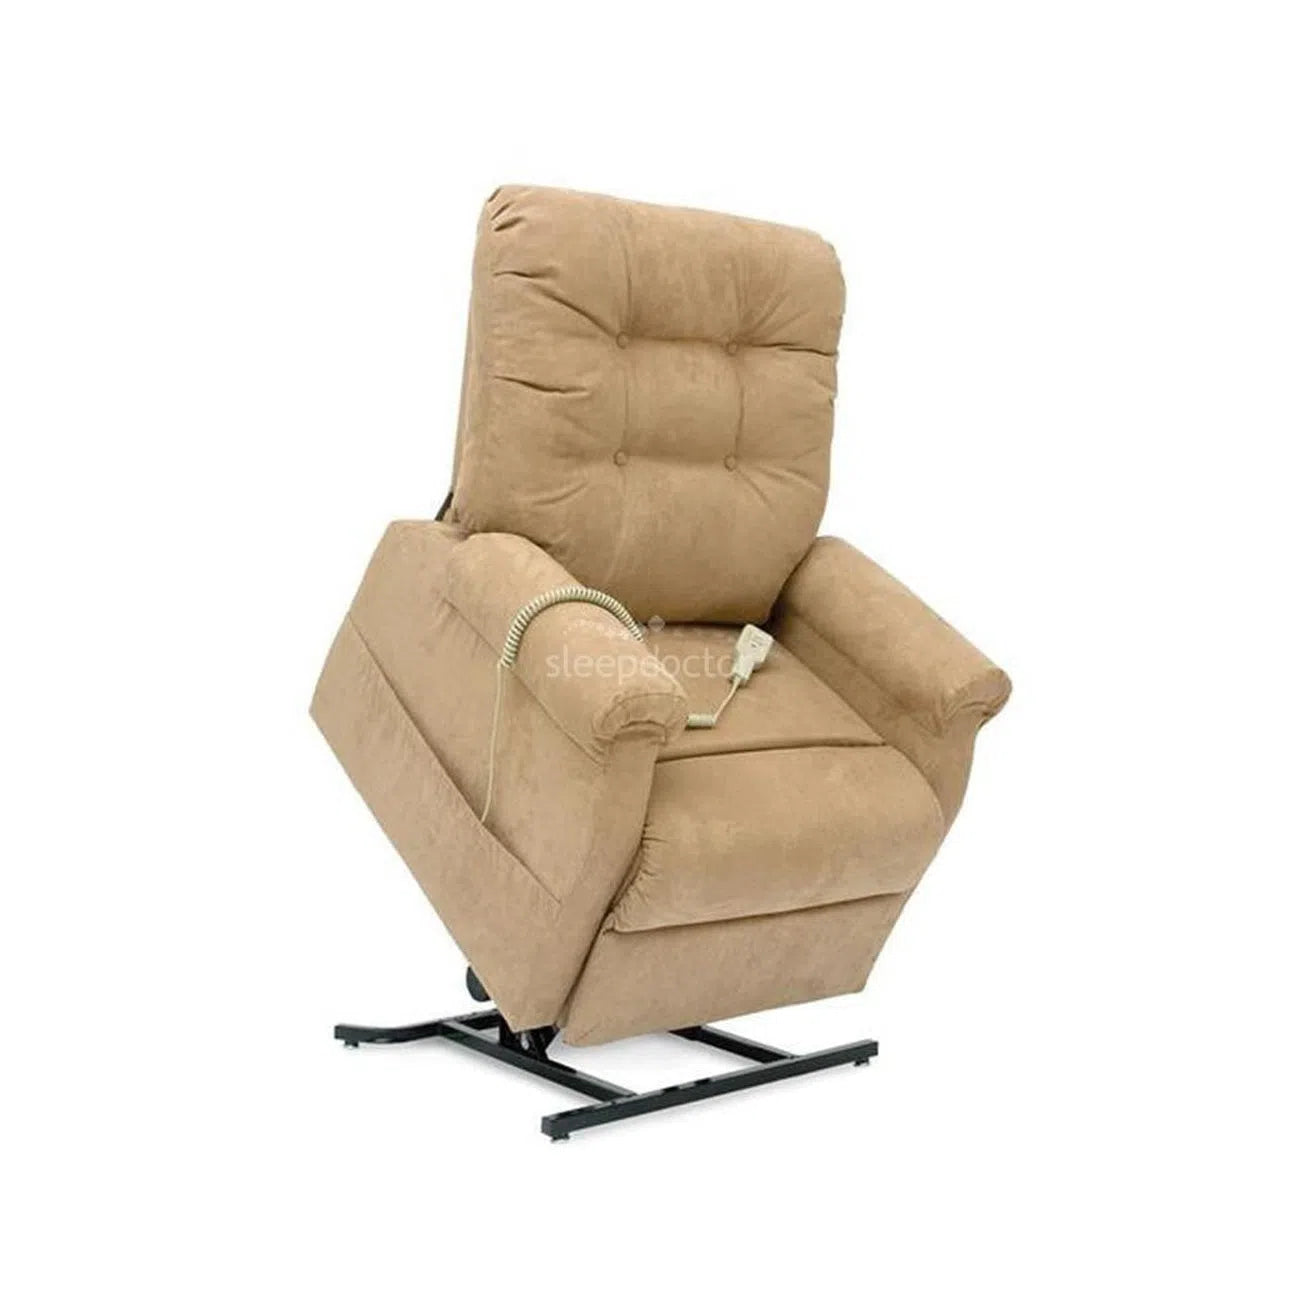 C101 Adjustable 3 Position Electric Lift Chair by Pride Mobility-Sleep Doctor